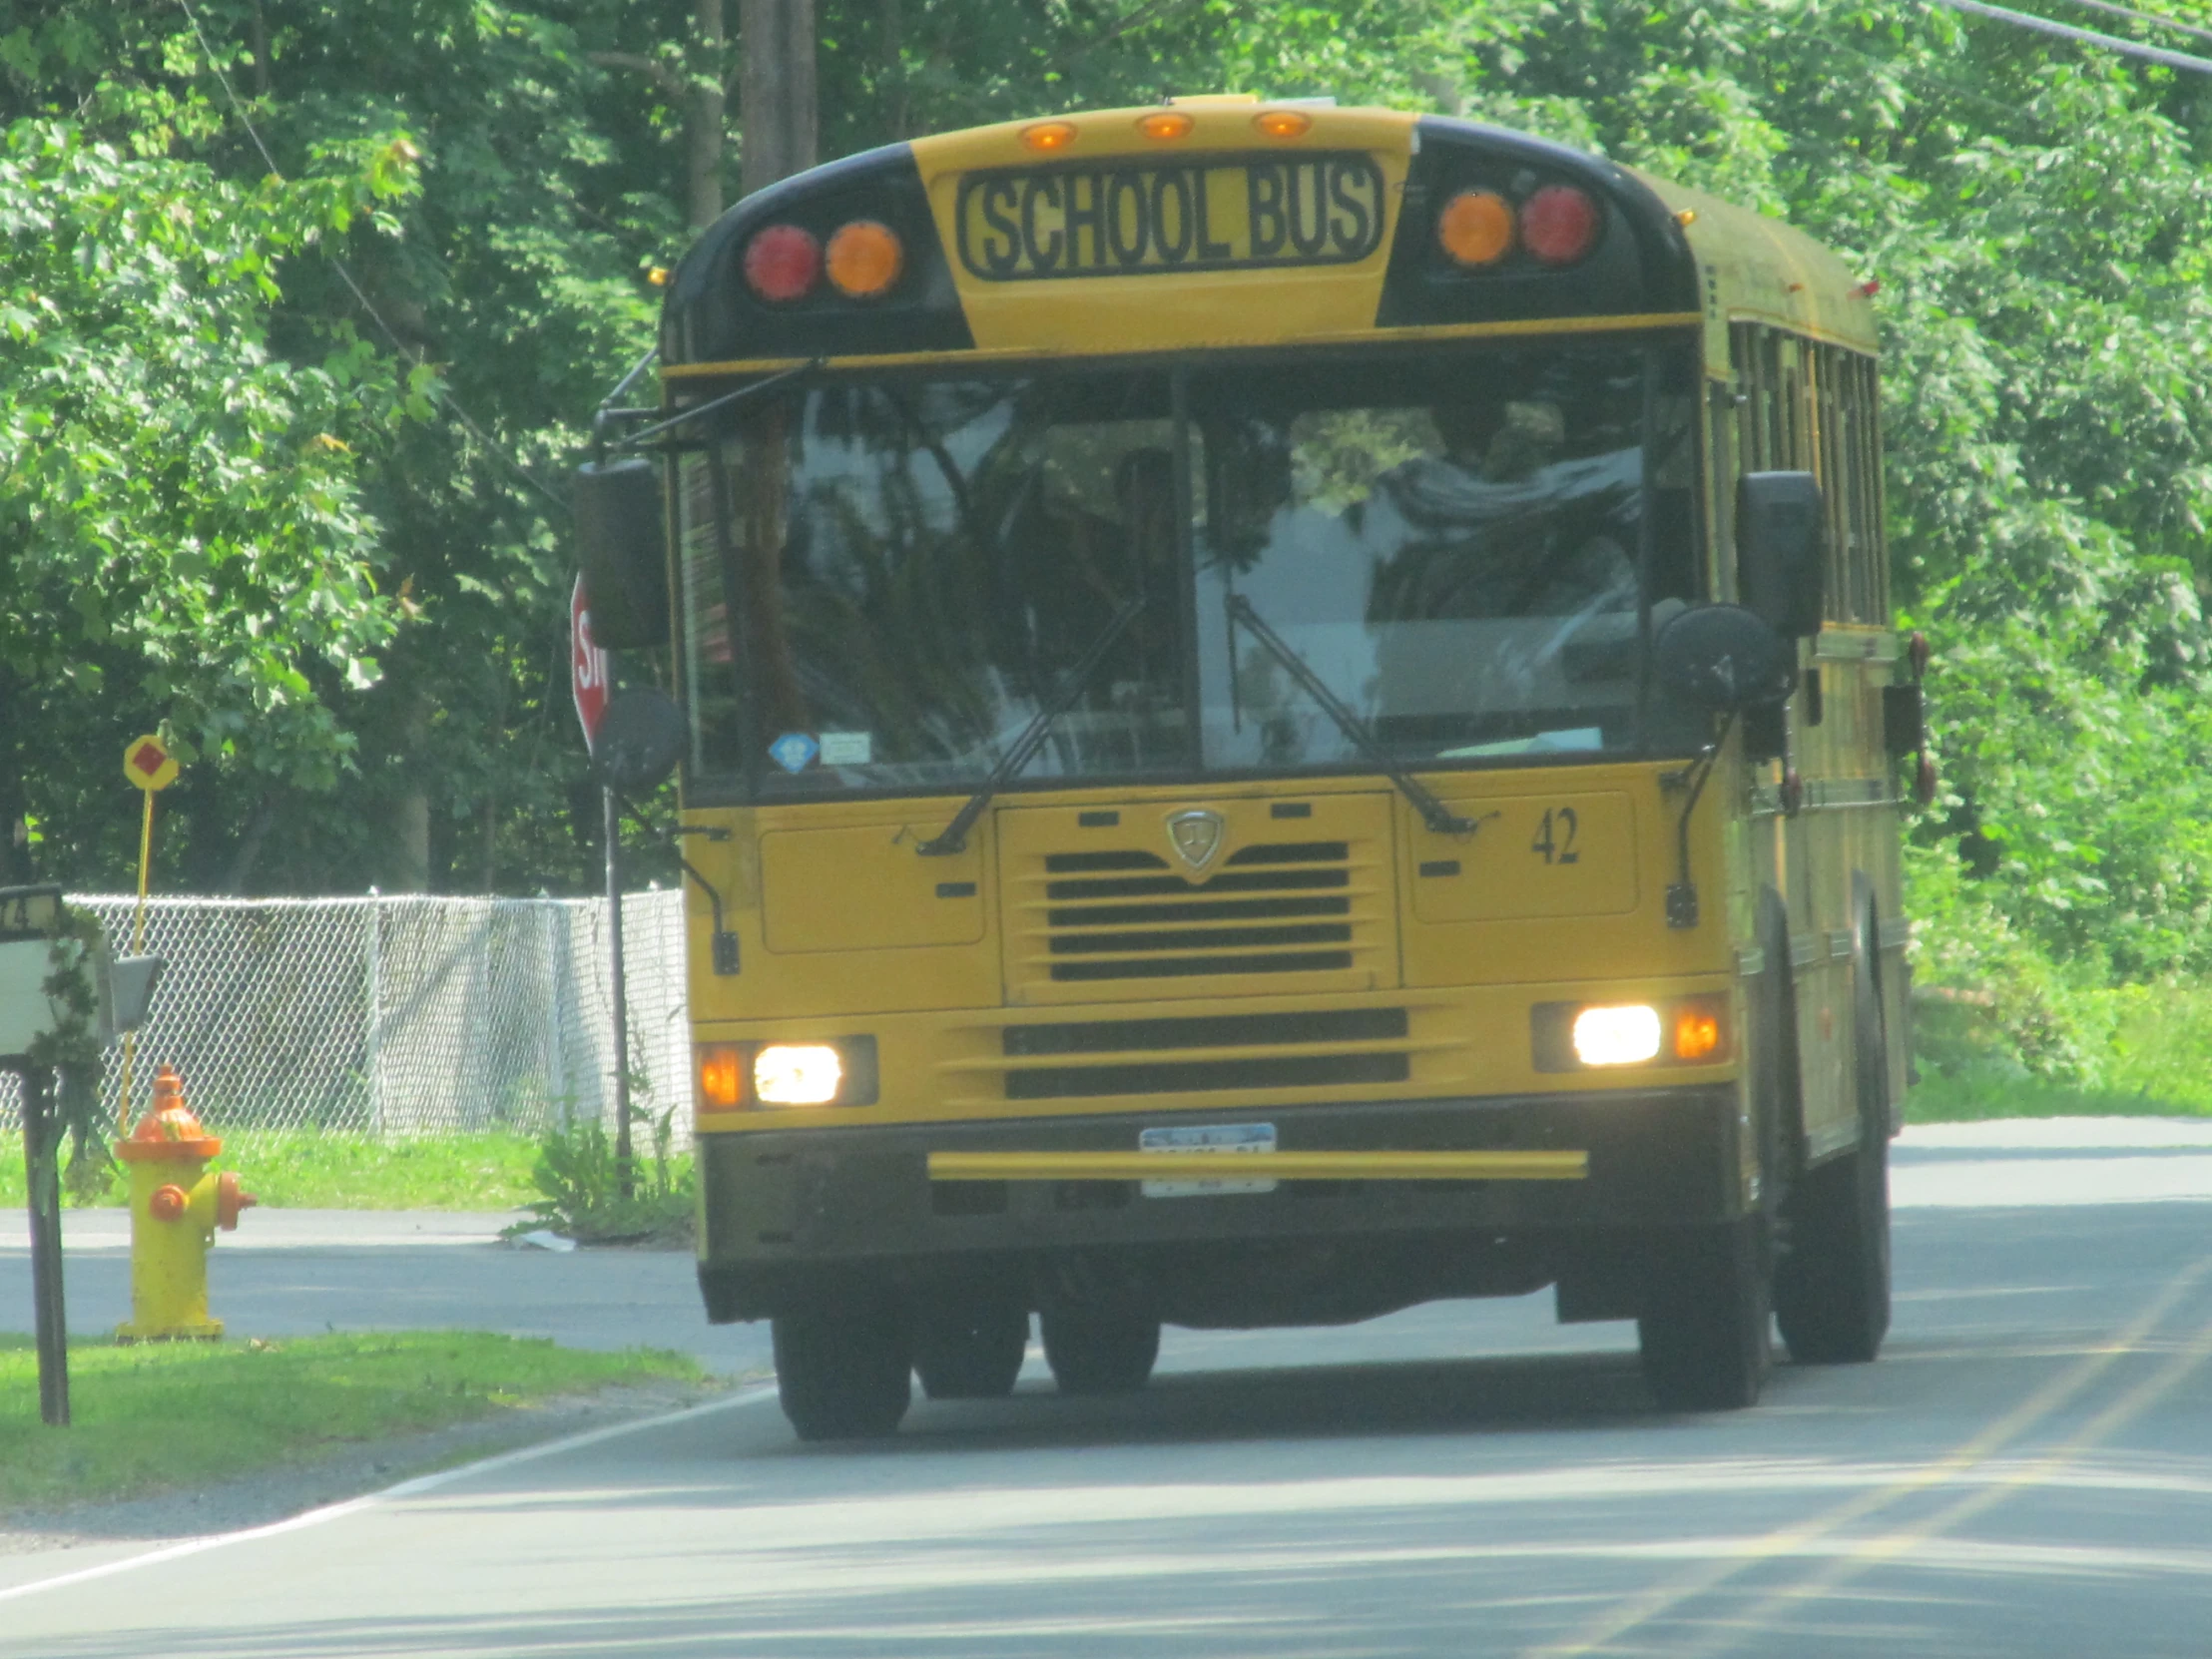 a school bus moving down the road in traffic